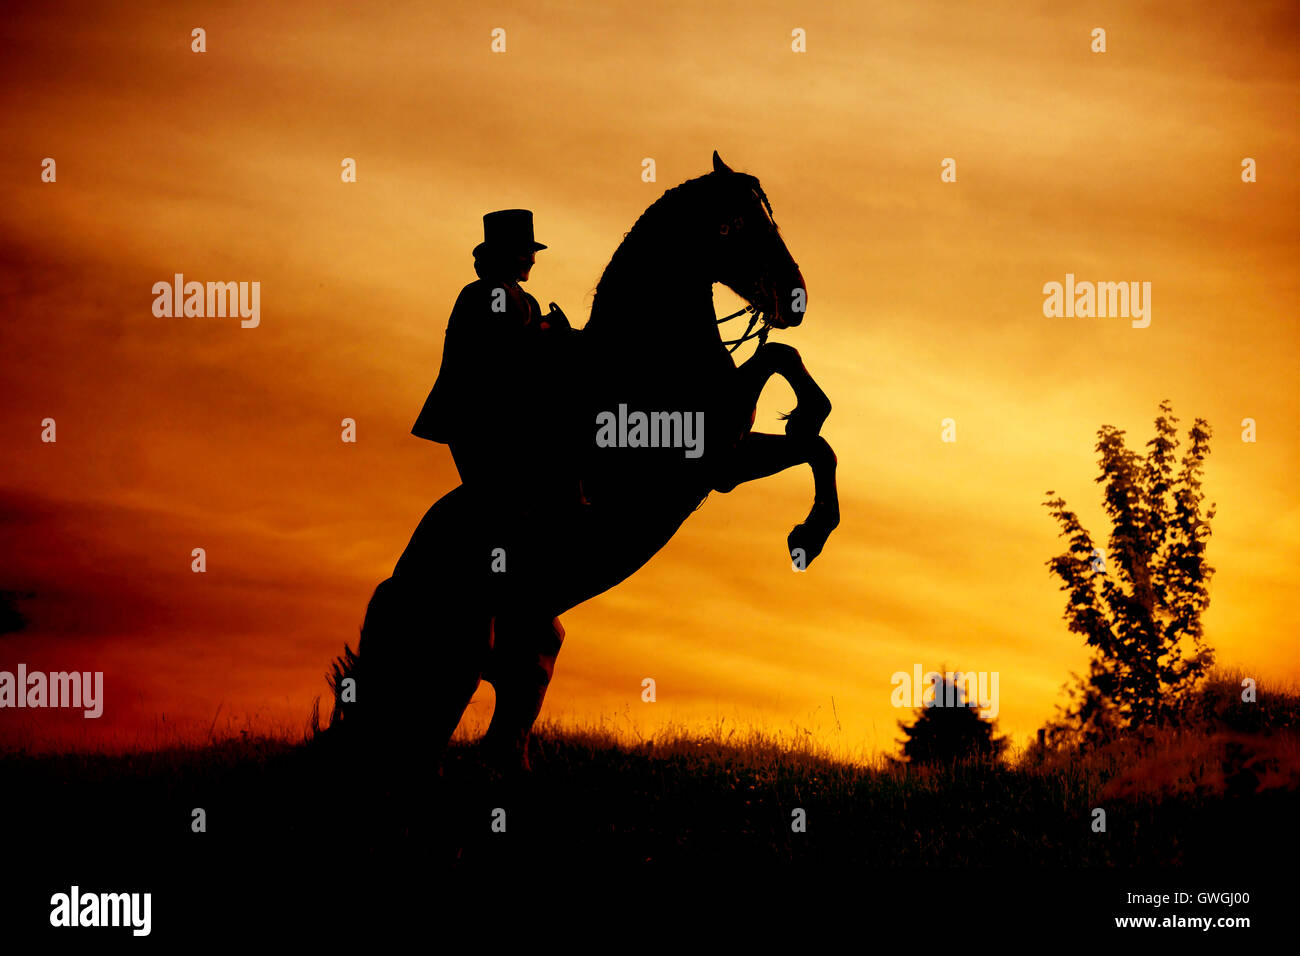 Freiberger Horse, Franches-Montagnes. Rider with costume and sidesaddle on a rearing horse, seen against a colourful sunset. Switzerland Stock Photo